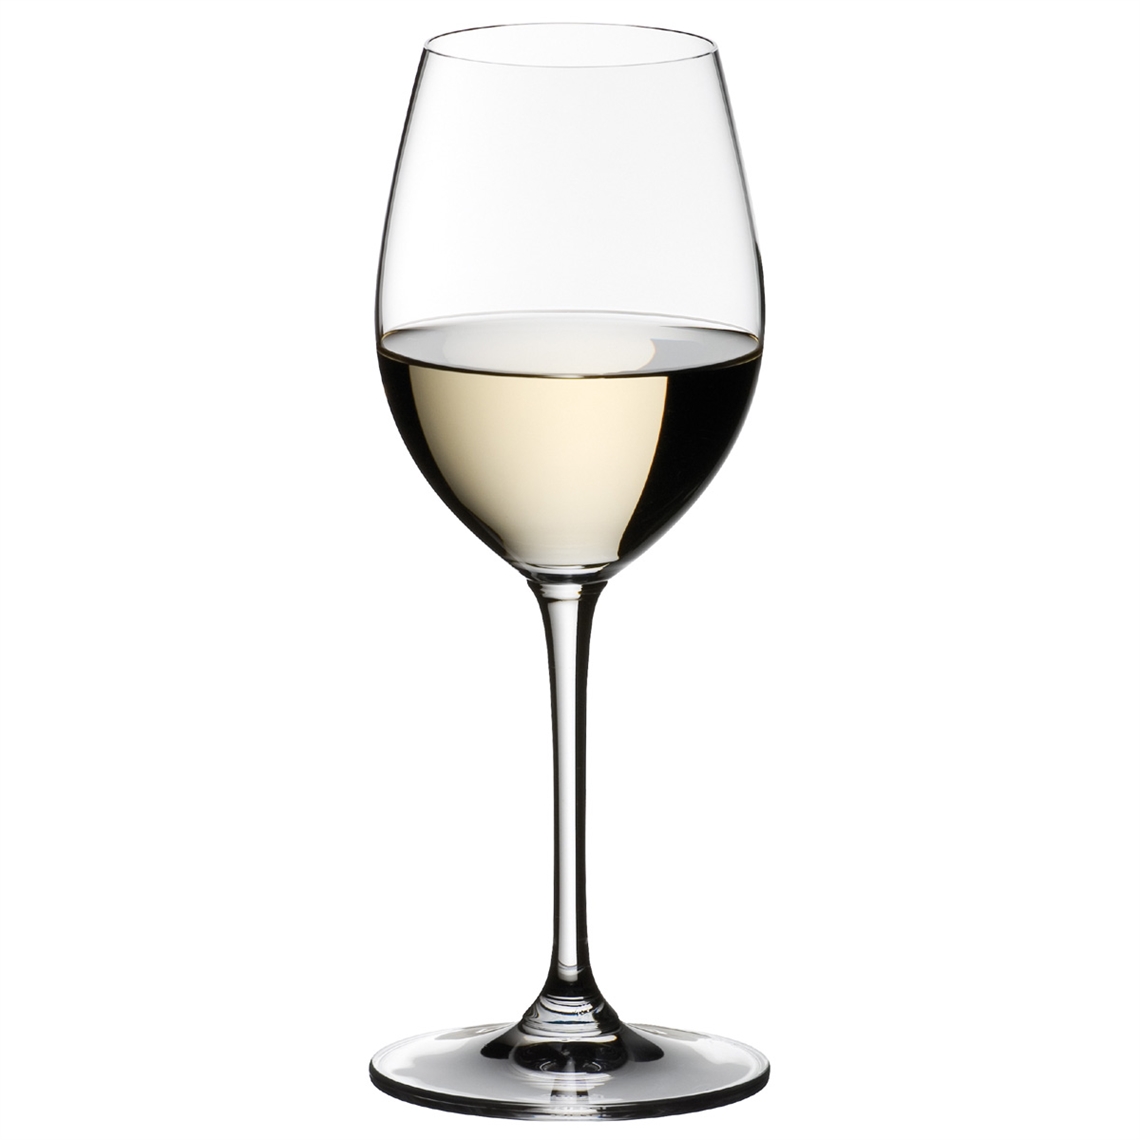 View more ivento from our Dessert Wine Glasses range